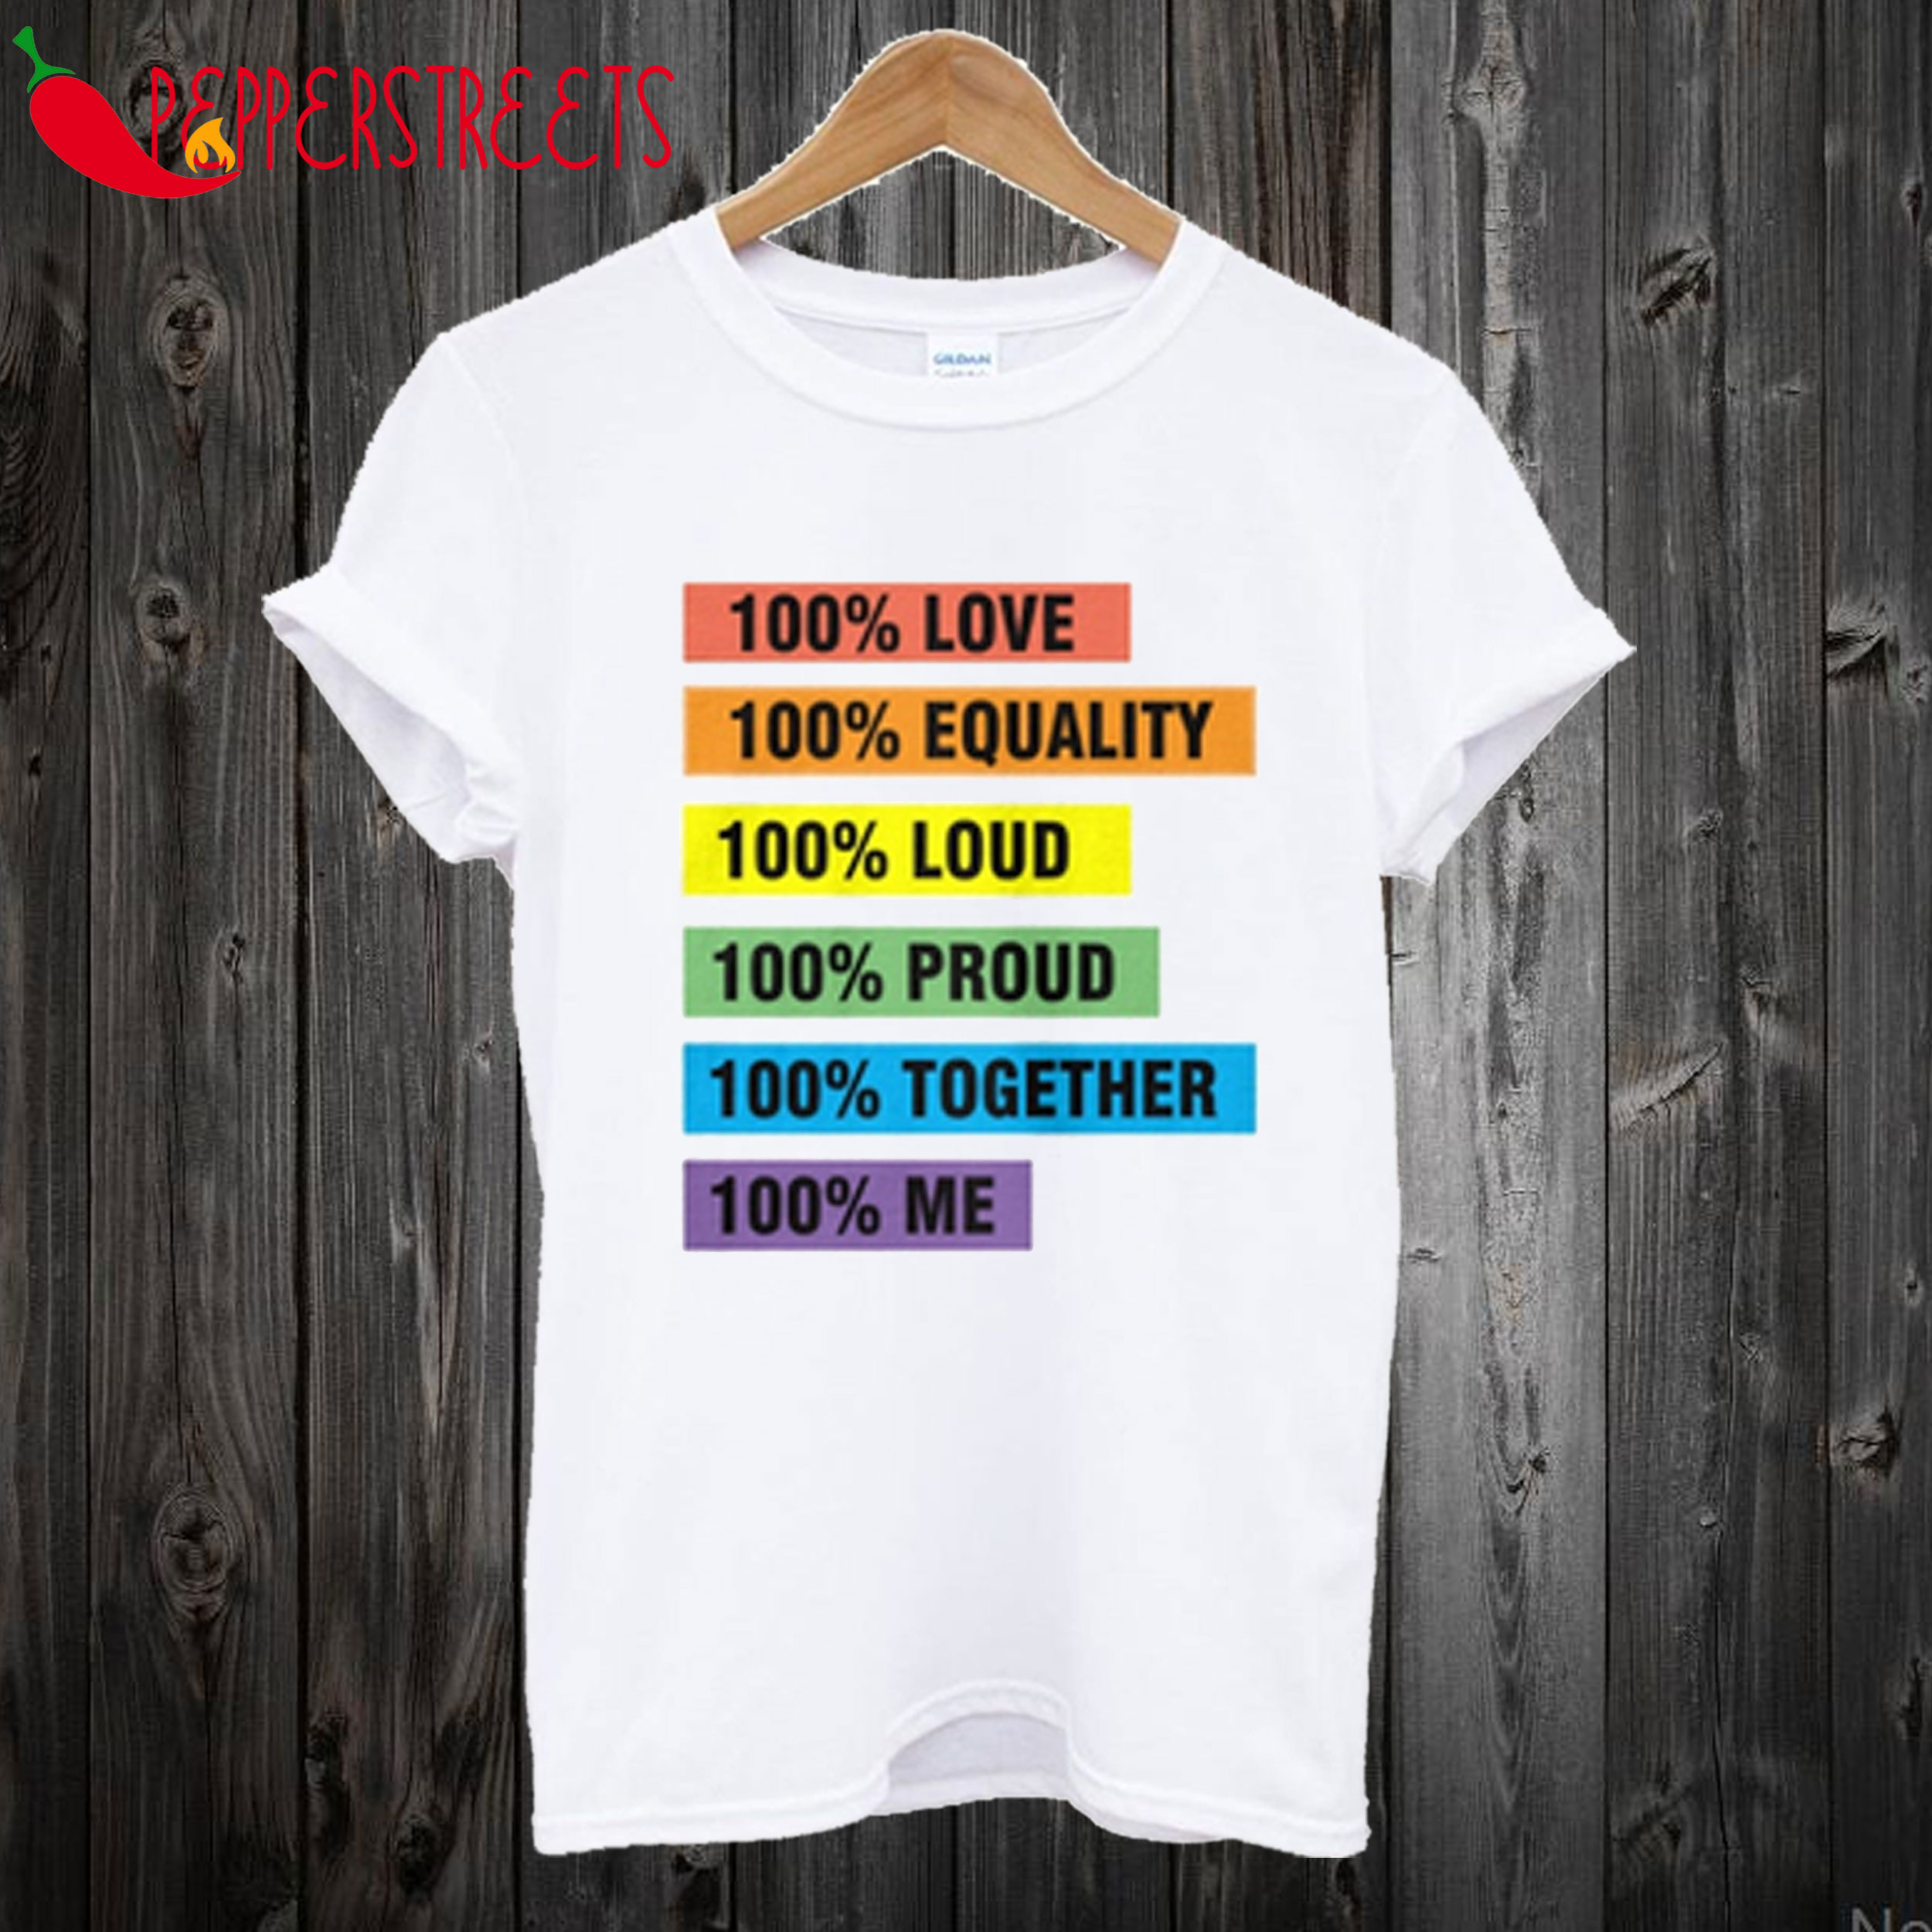 Men Of Quality Respect Womens Equality T Shirt